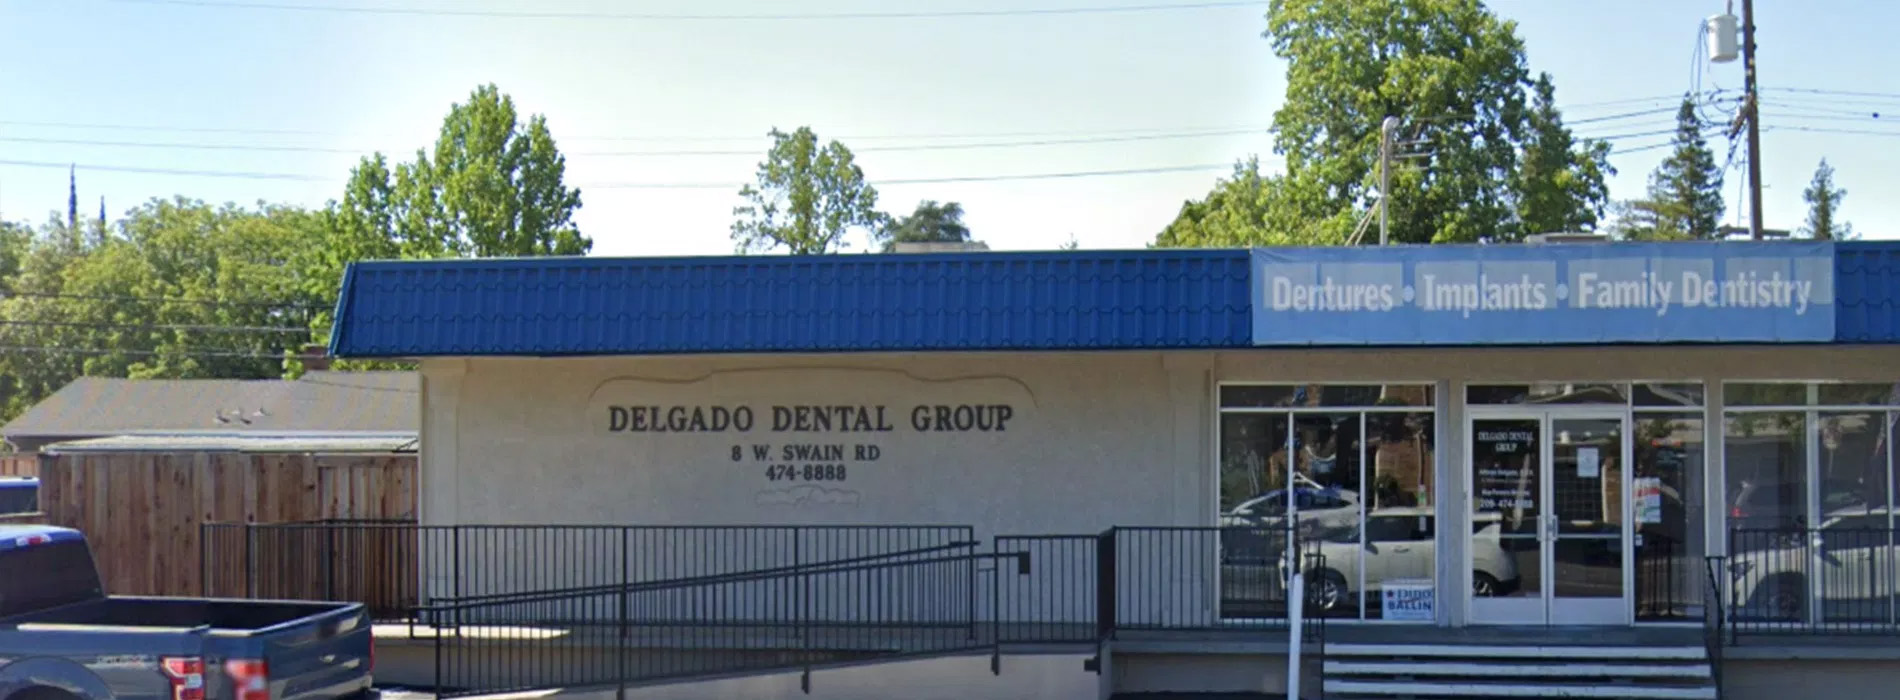 The image depicts a building with a sign that reads  Diego de la Guardia  and a blue sign above the entrance, along with other text that is not fully legible.